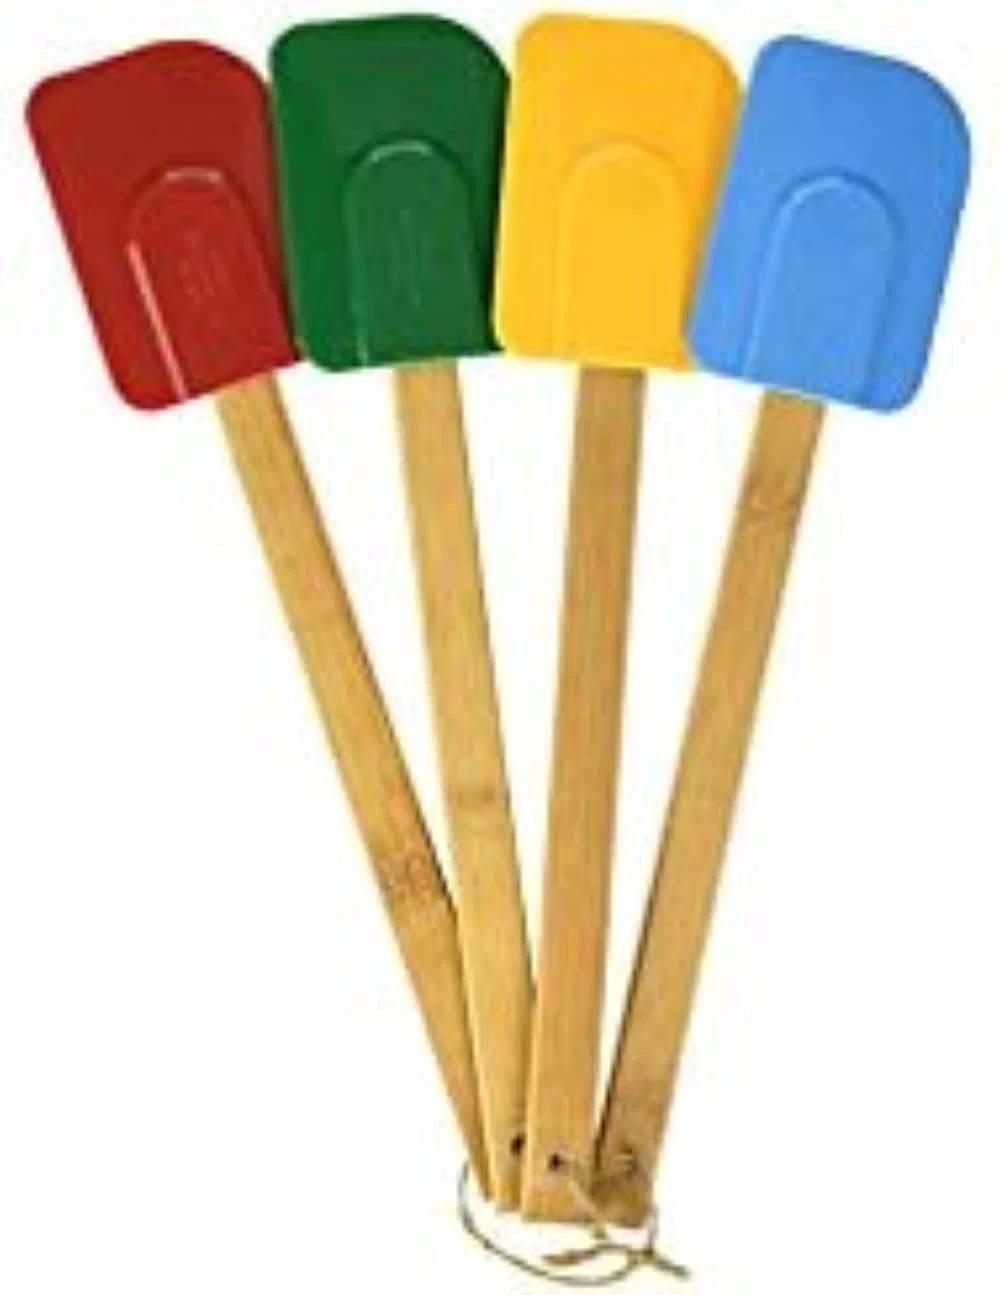 Goodcook 4-Pack Silicone & Bamboo Rubber Spatulas for Easy Cleaning | Image